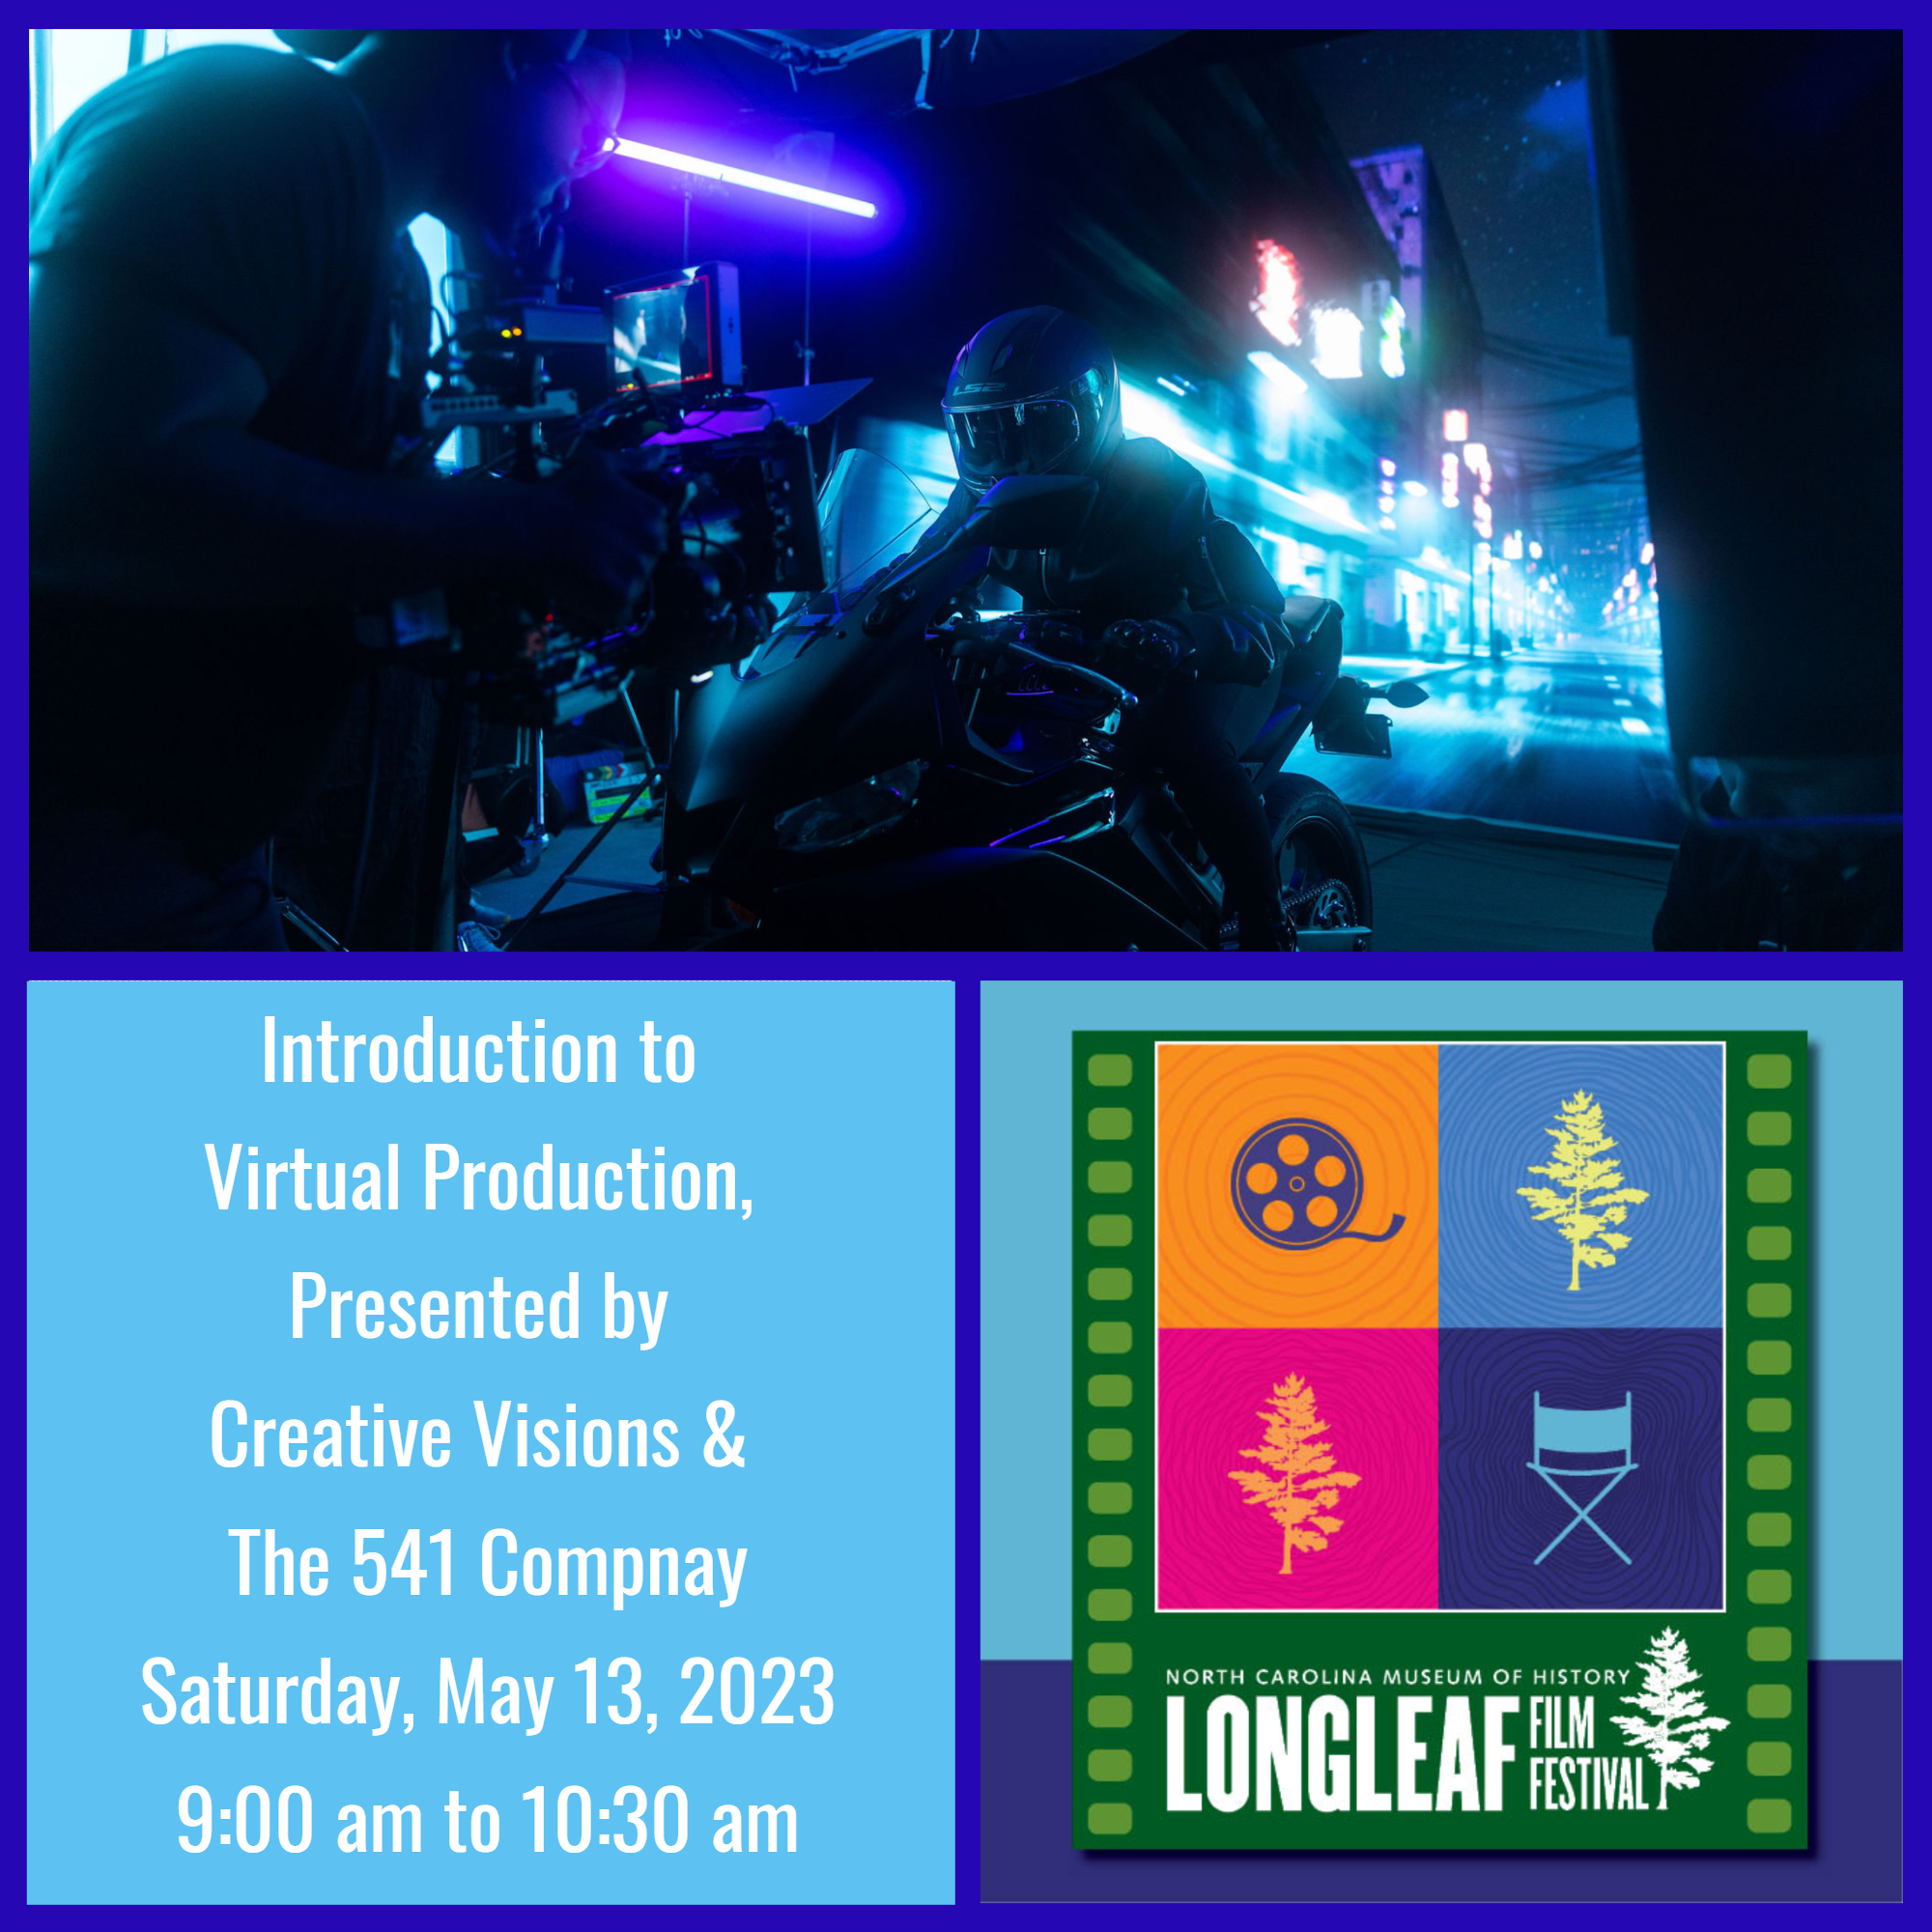 Introduction to Virtual Production is one of three workshops at Longleaf 2023; this one is presented by Creative Visions and The 541 Co.